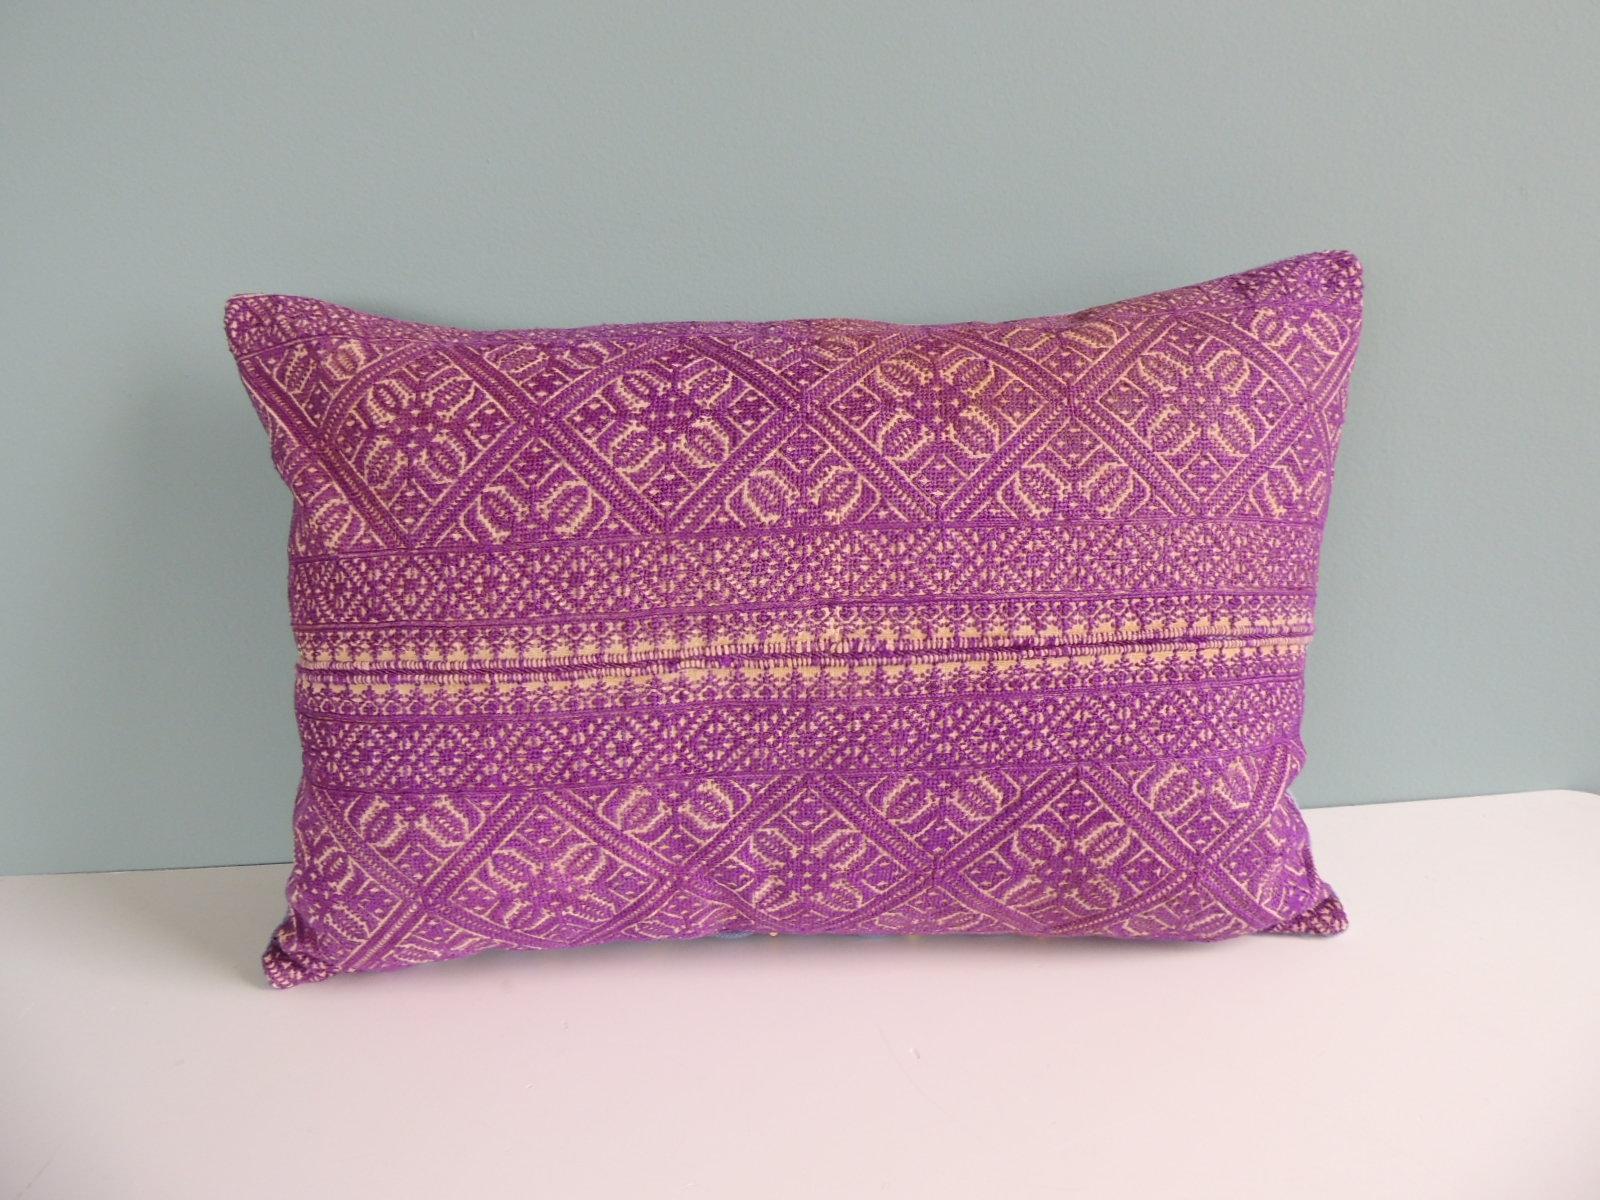 Antique Fuchsia embroidered fez decorative bolster pillow with antique blue linen backing.
Decorative pillow handcrafted and designed in the USA. 
Closure by stitch (no zipper closure) with custom-made feather / down pillow insert.
Size: 15